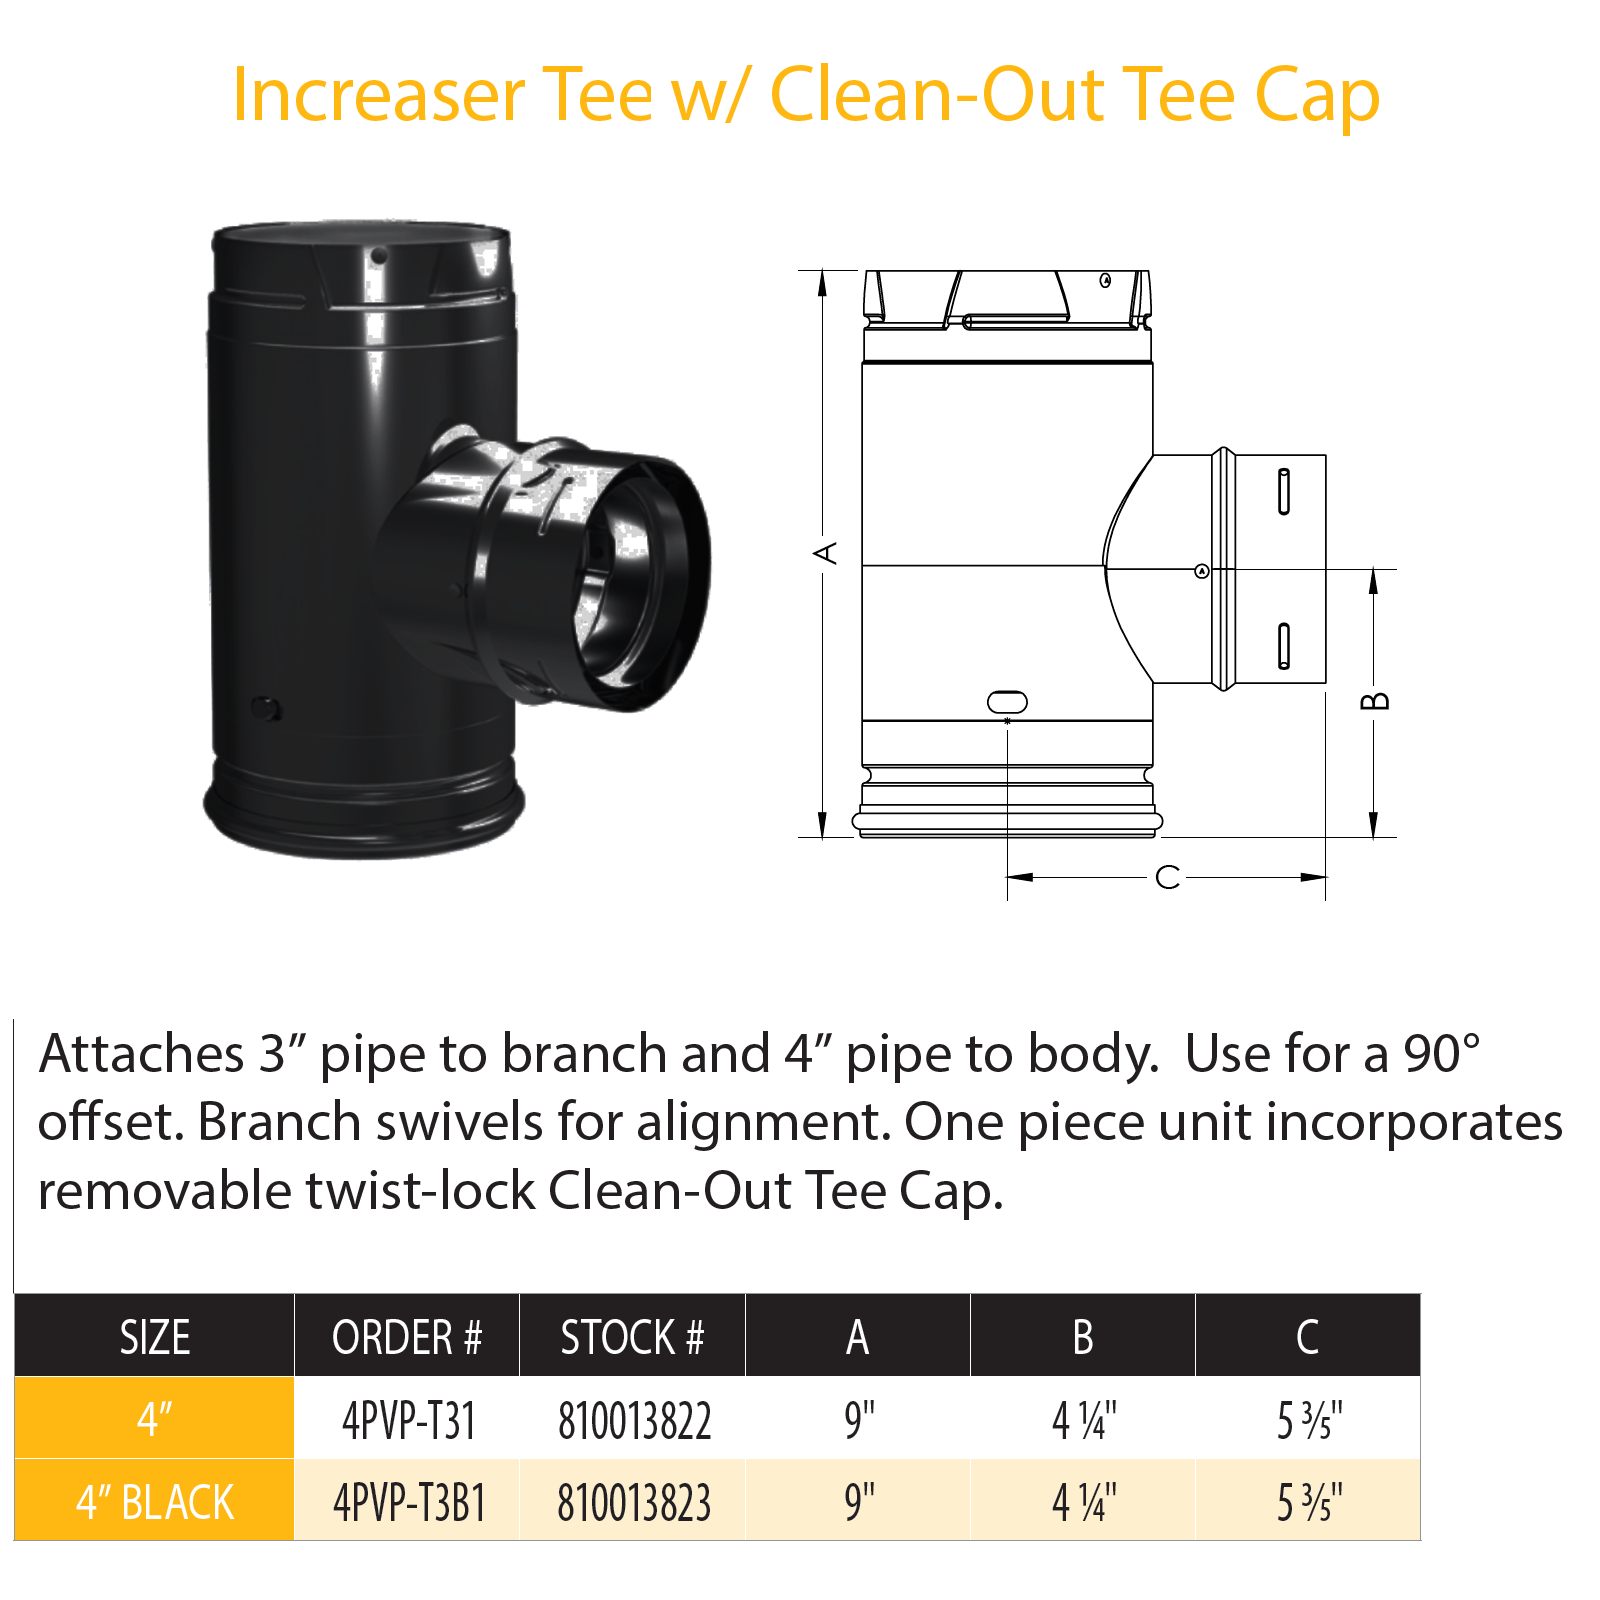 DuraVent PVP Increaser Tee w/Clean-Out Tee Cap | 4PVP-T3B1